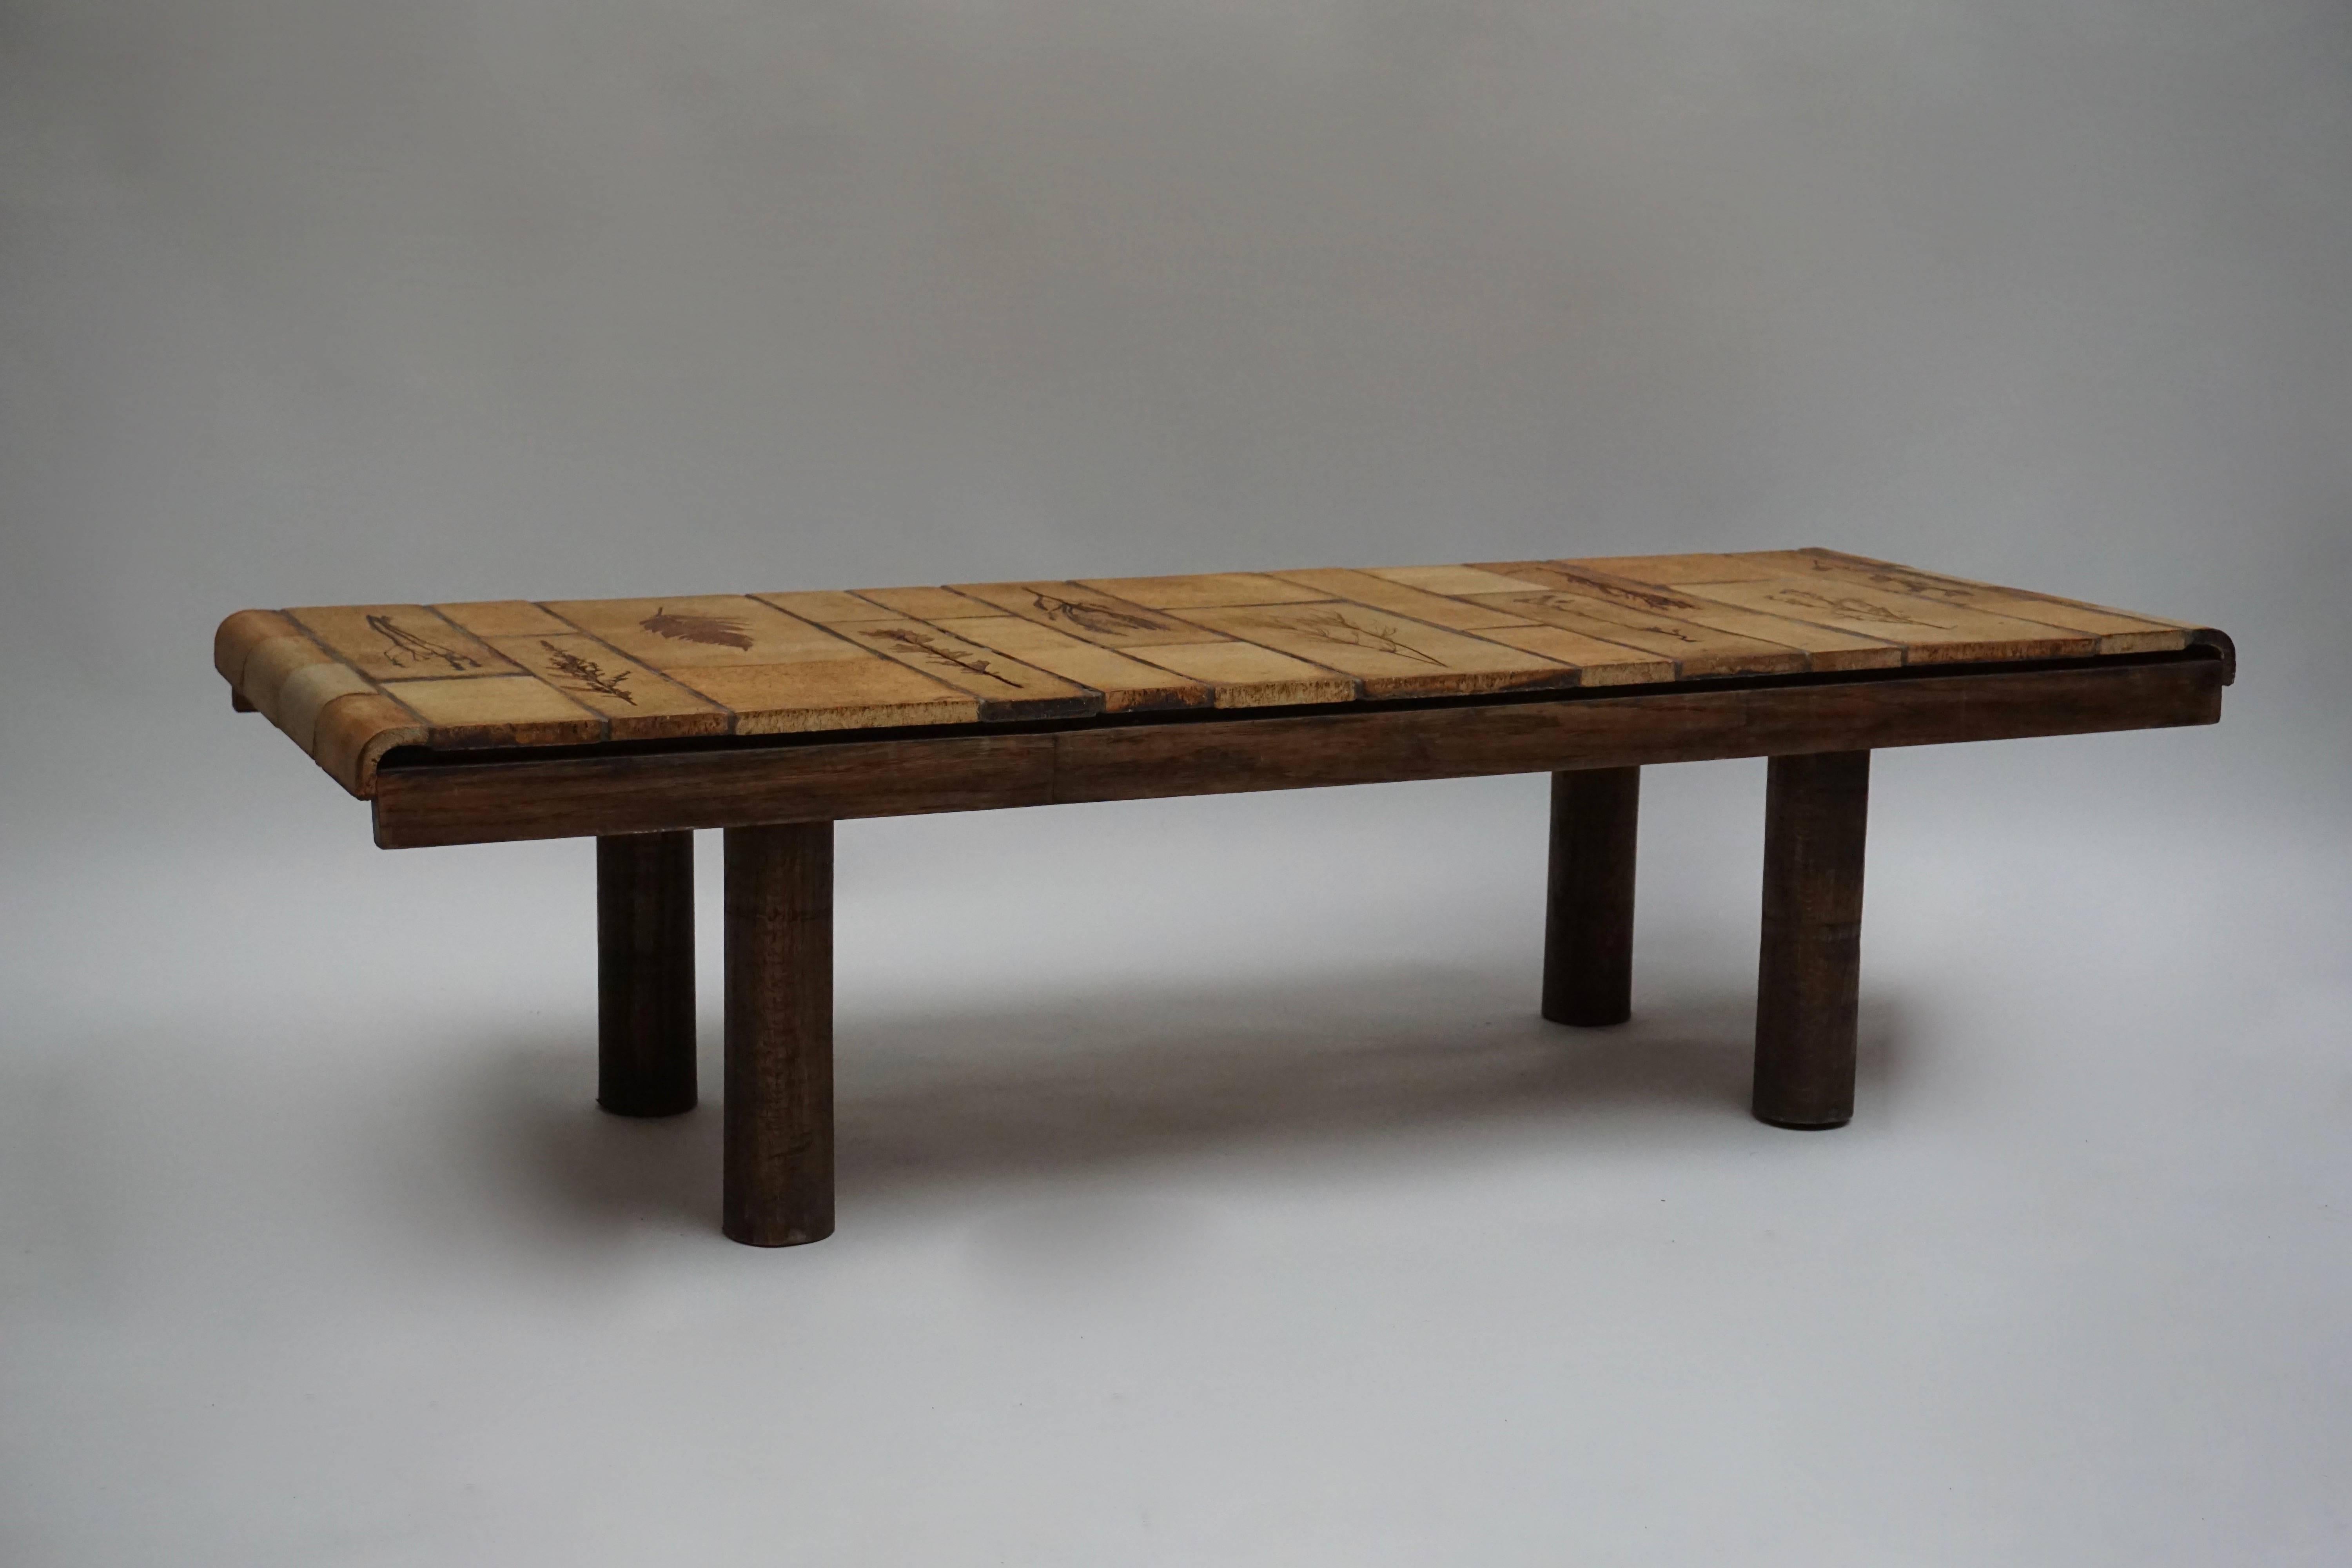 An architectural wood and ceramic table by Roger Capron, France.
Measures: Height 38 cm.
Width 142 cm.
Depth 54 cm.
Weight 44 kg.